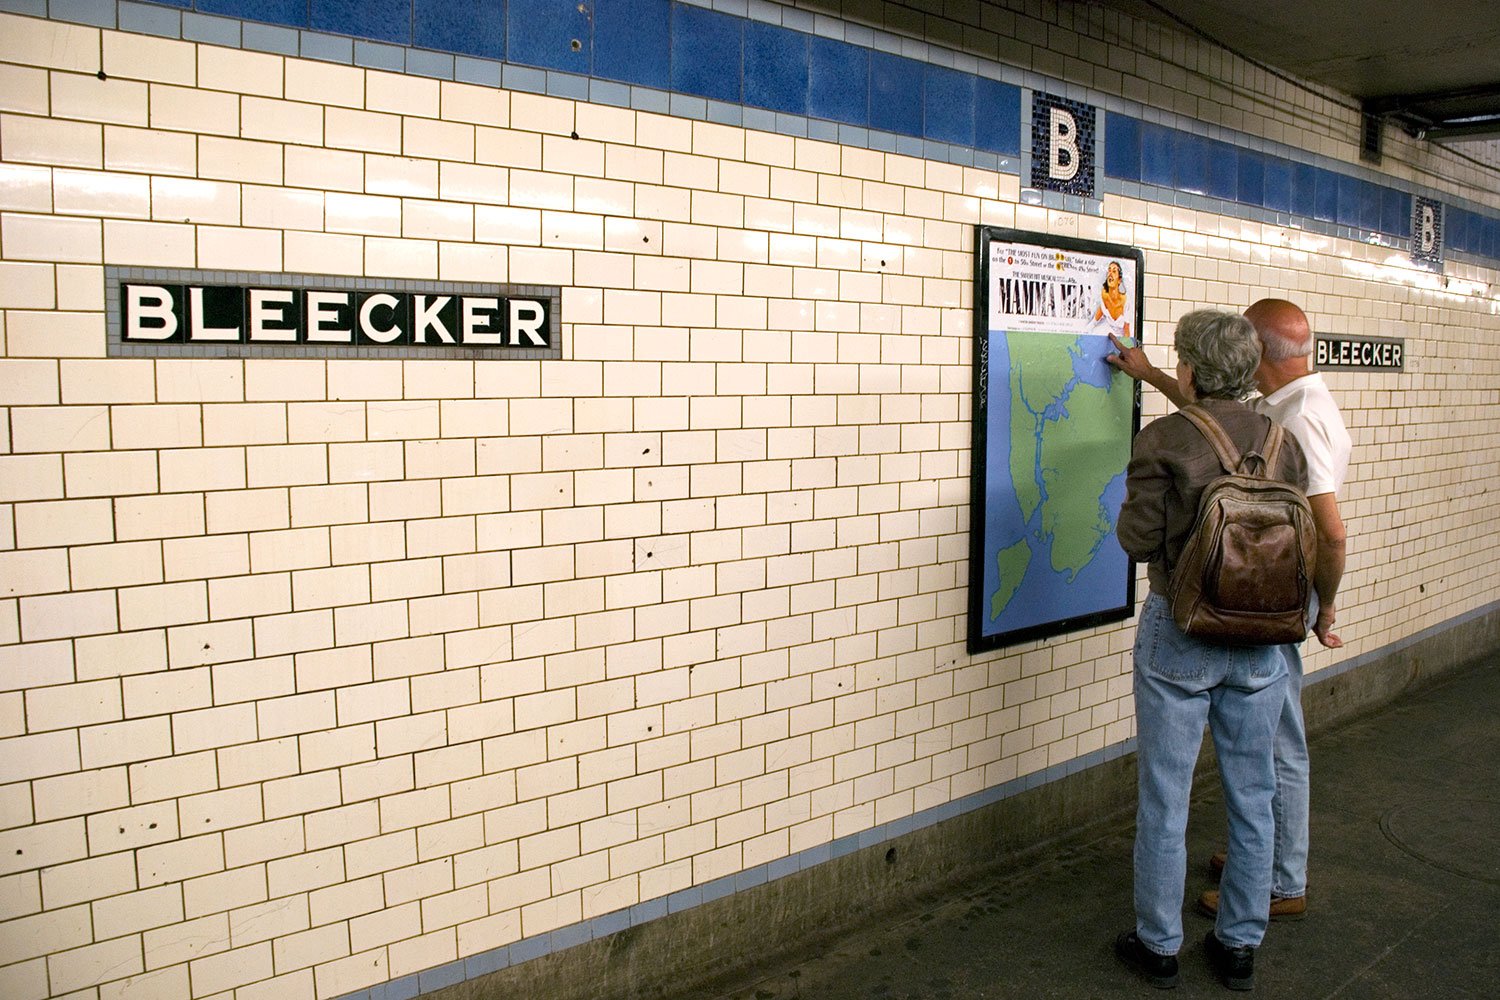   Get Lost! (NYC) , 2009 site-specific intervention, photographic documentation 